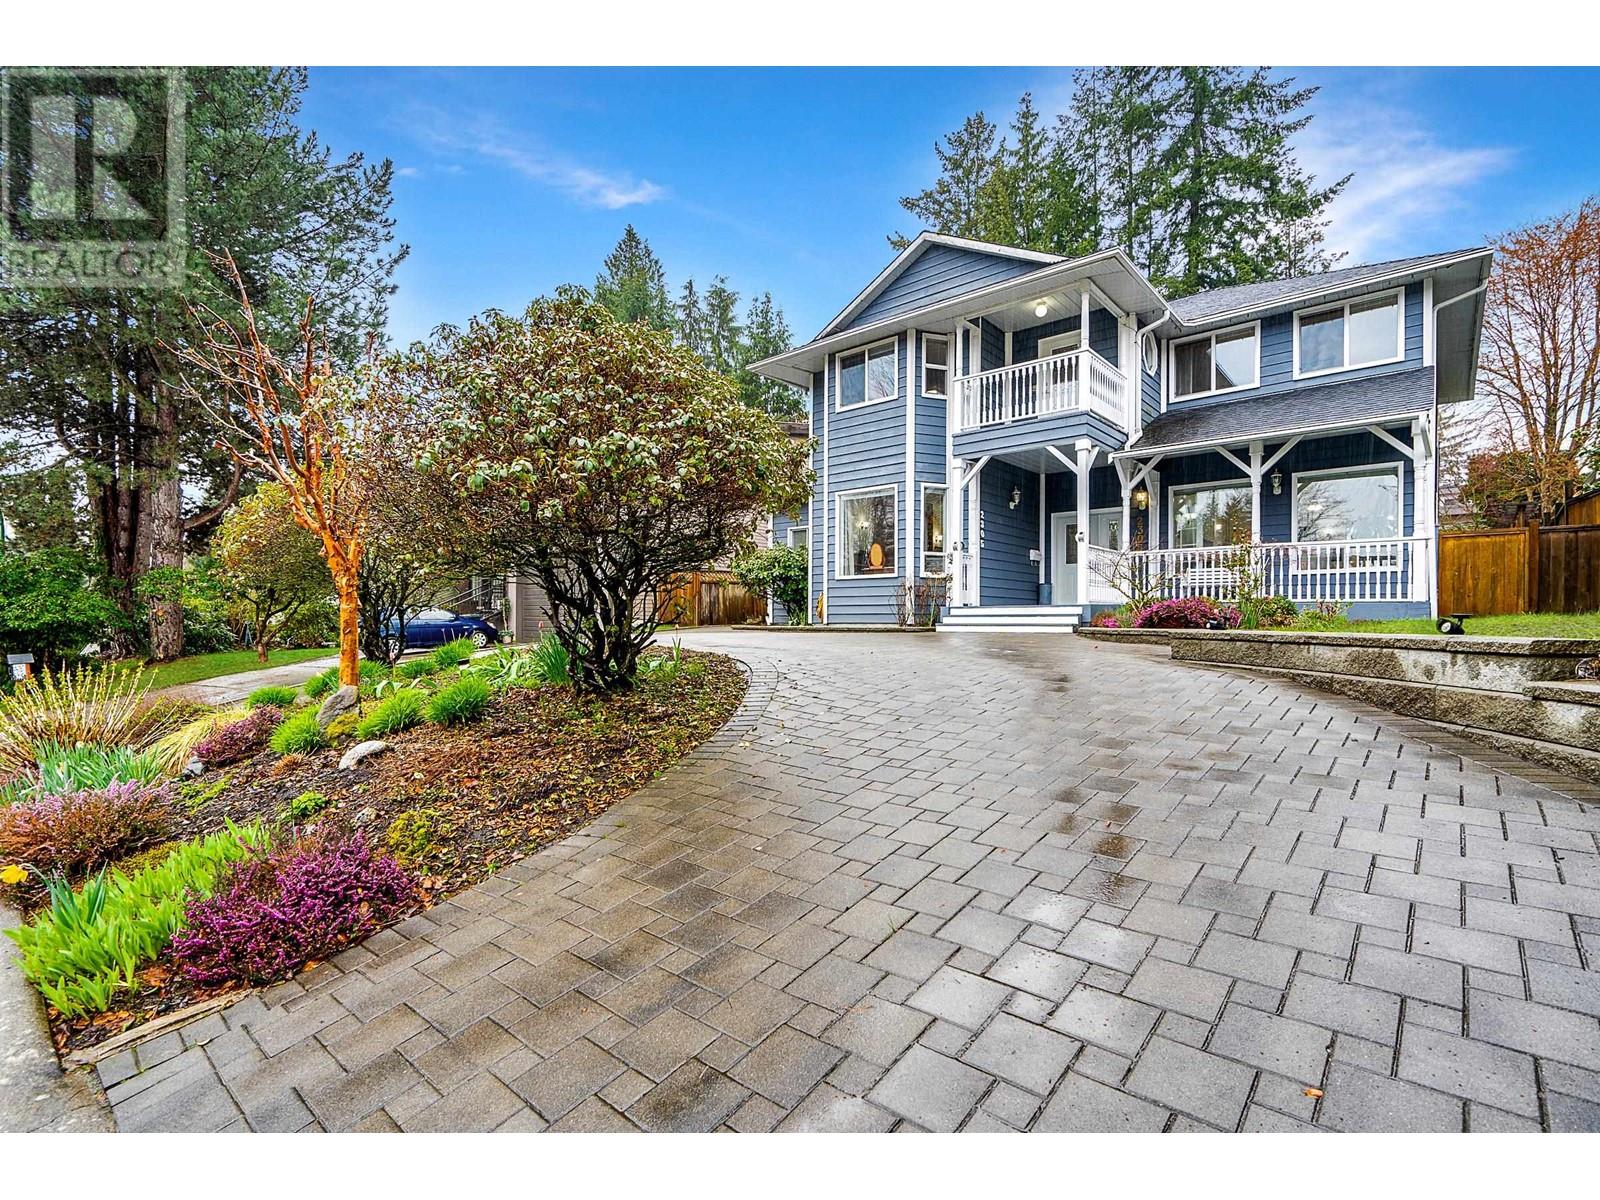 2305 ENNERDALE ROAD, north vancouver, British Columbia